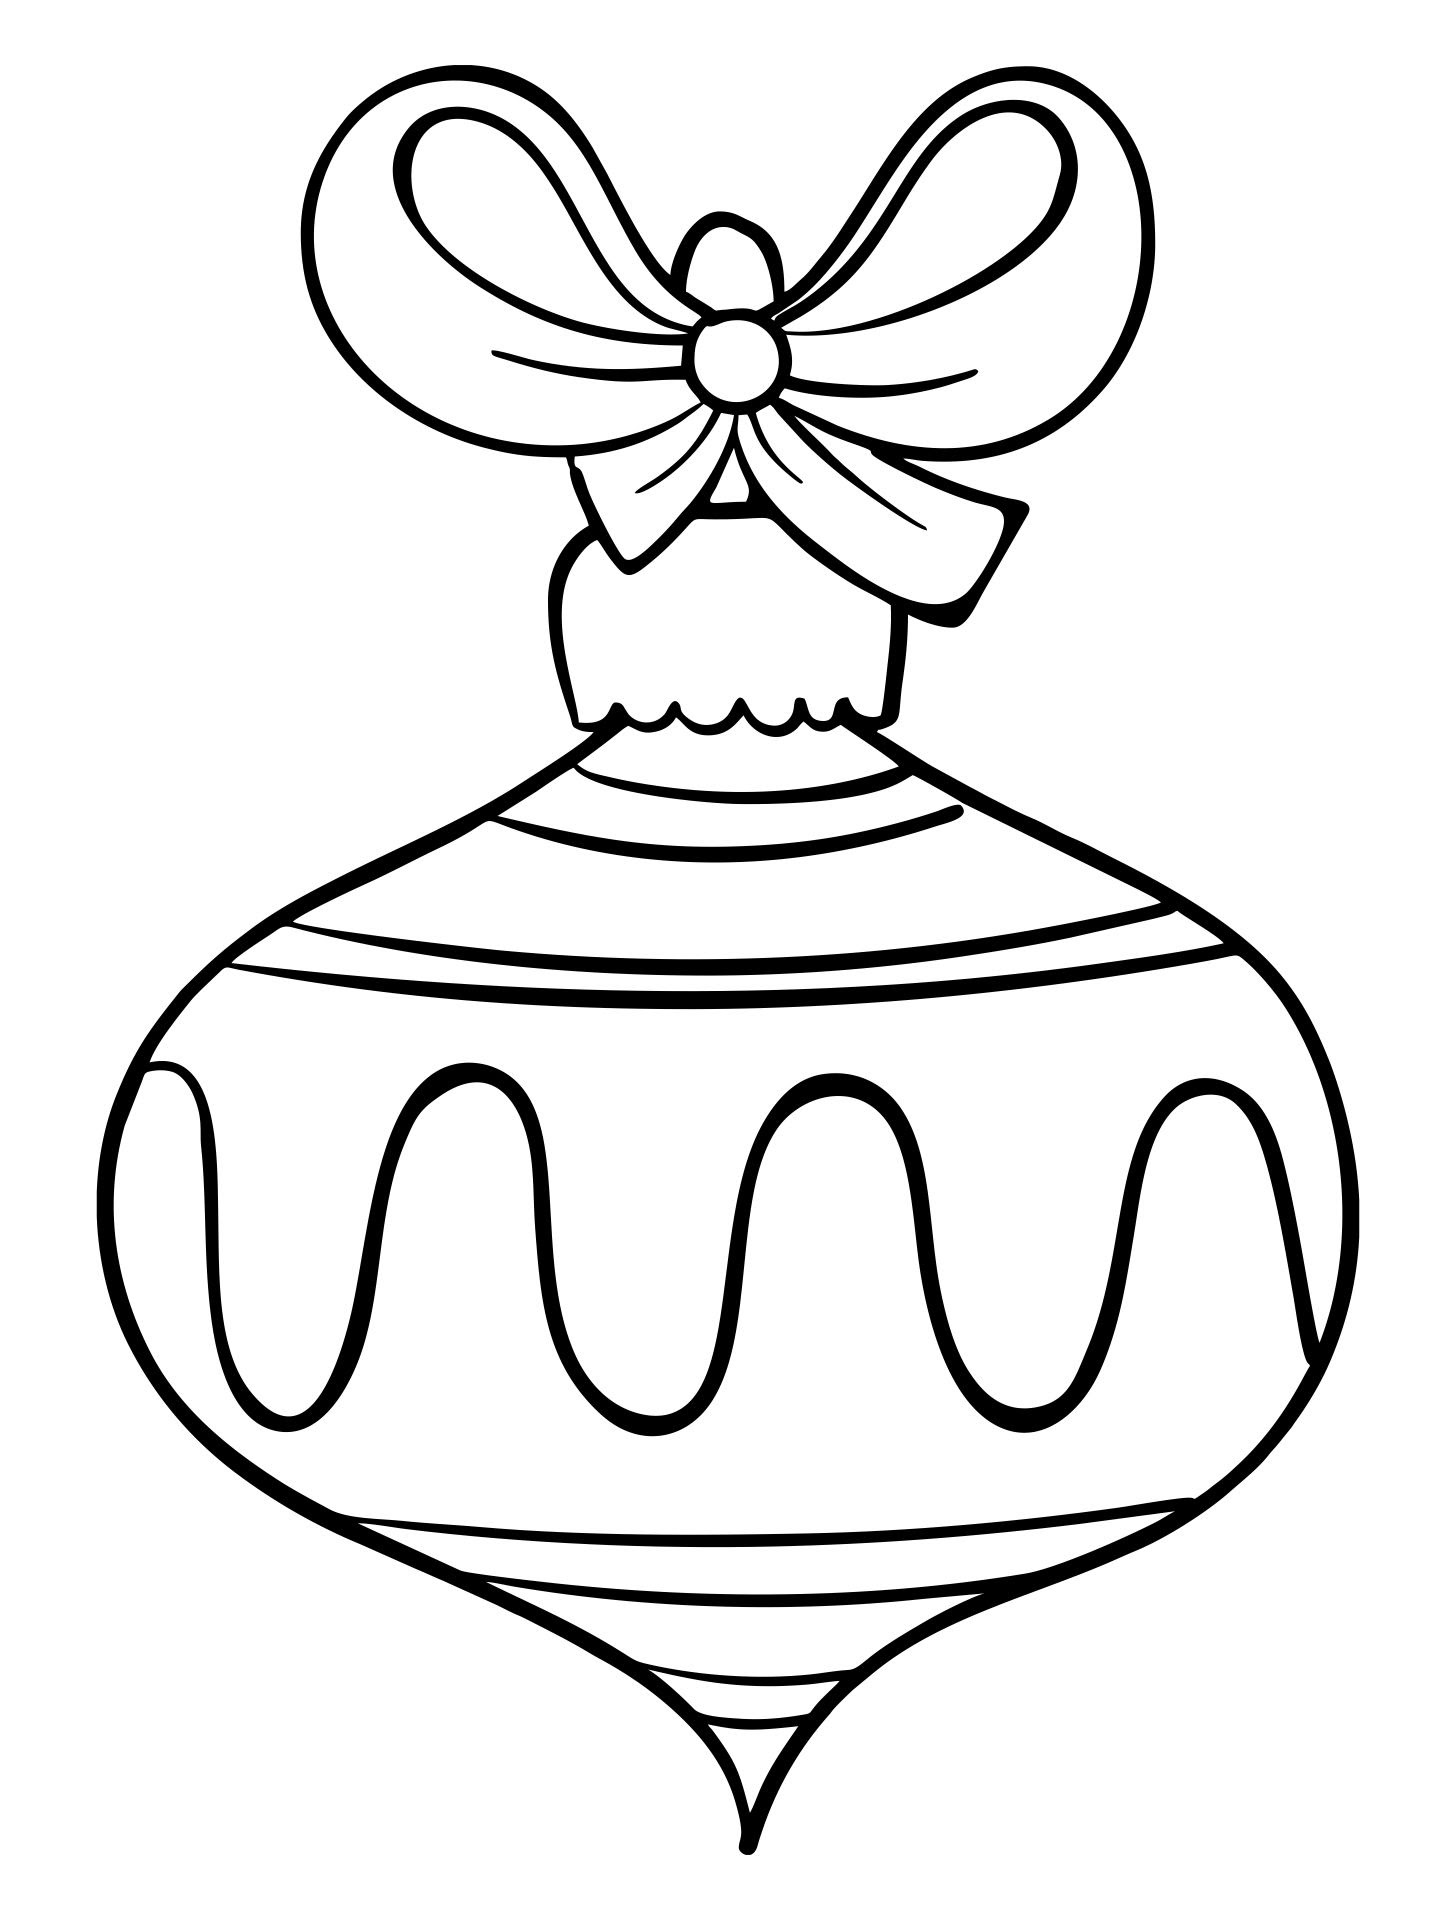 Round Christmas Ornament Coloring Page Free Printable Coloring Pages 